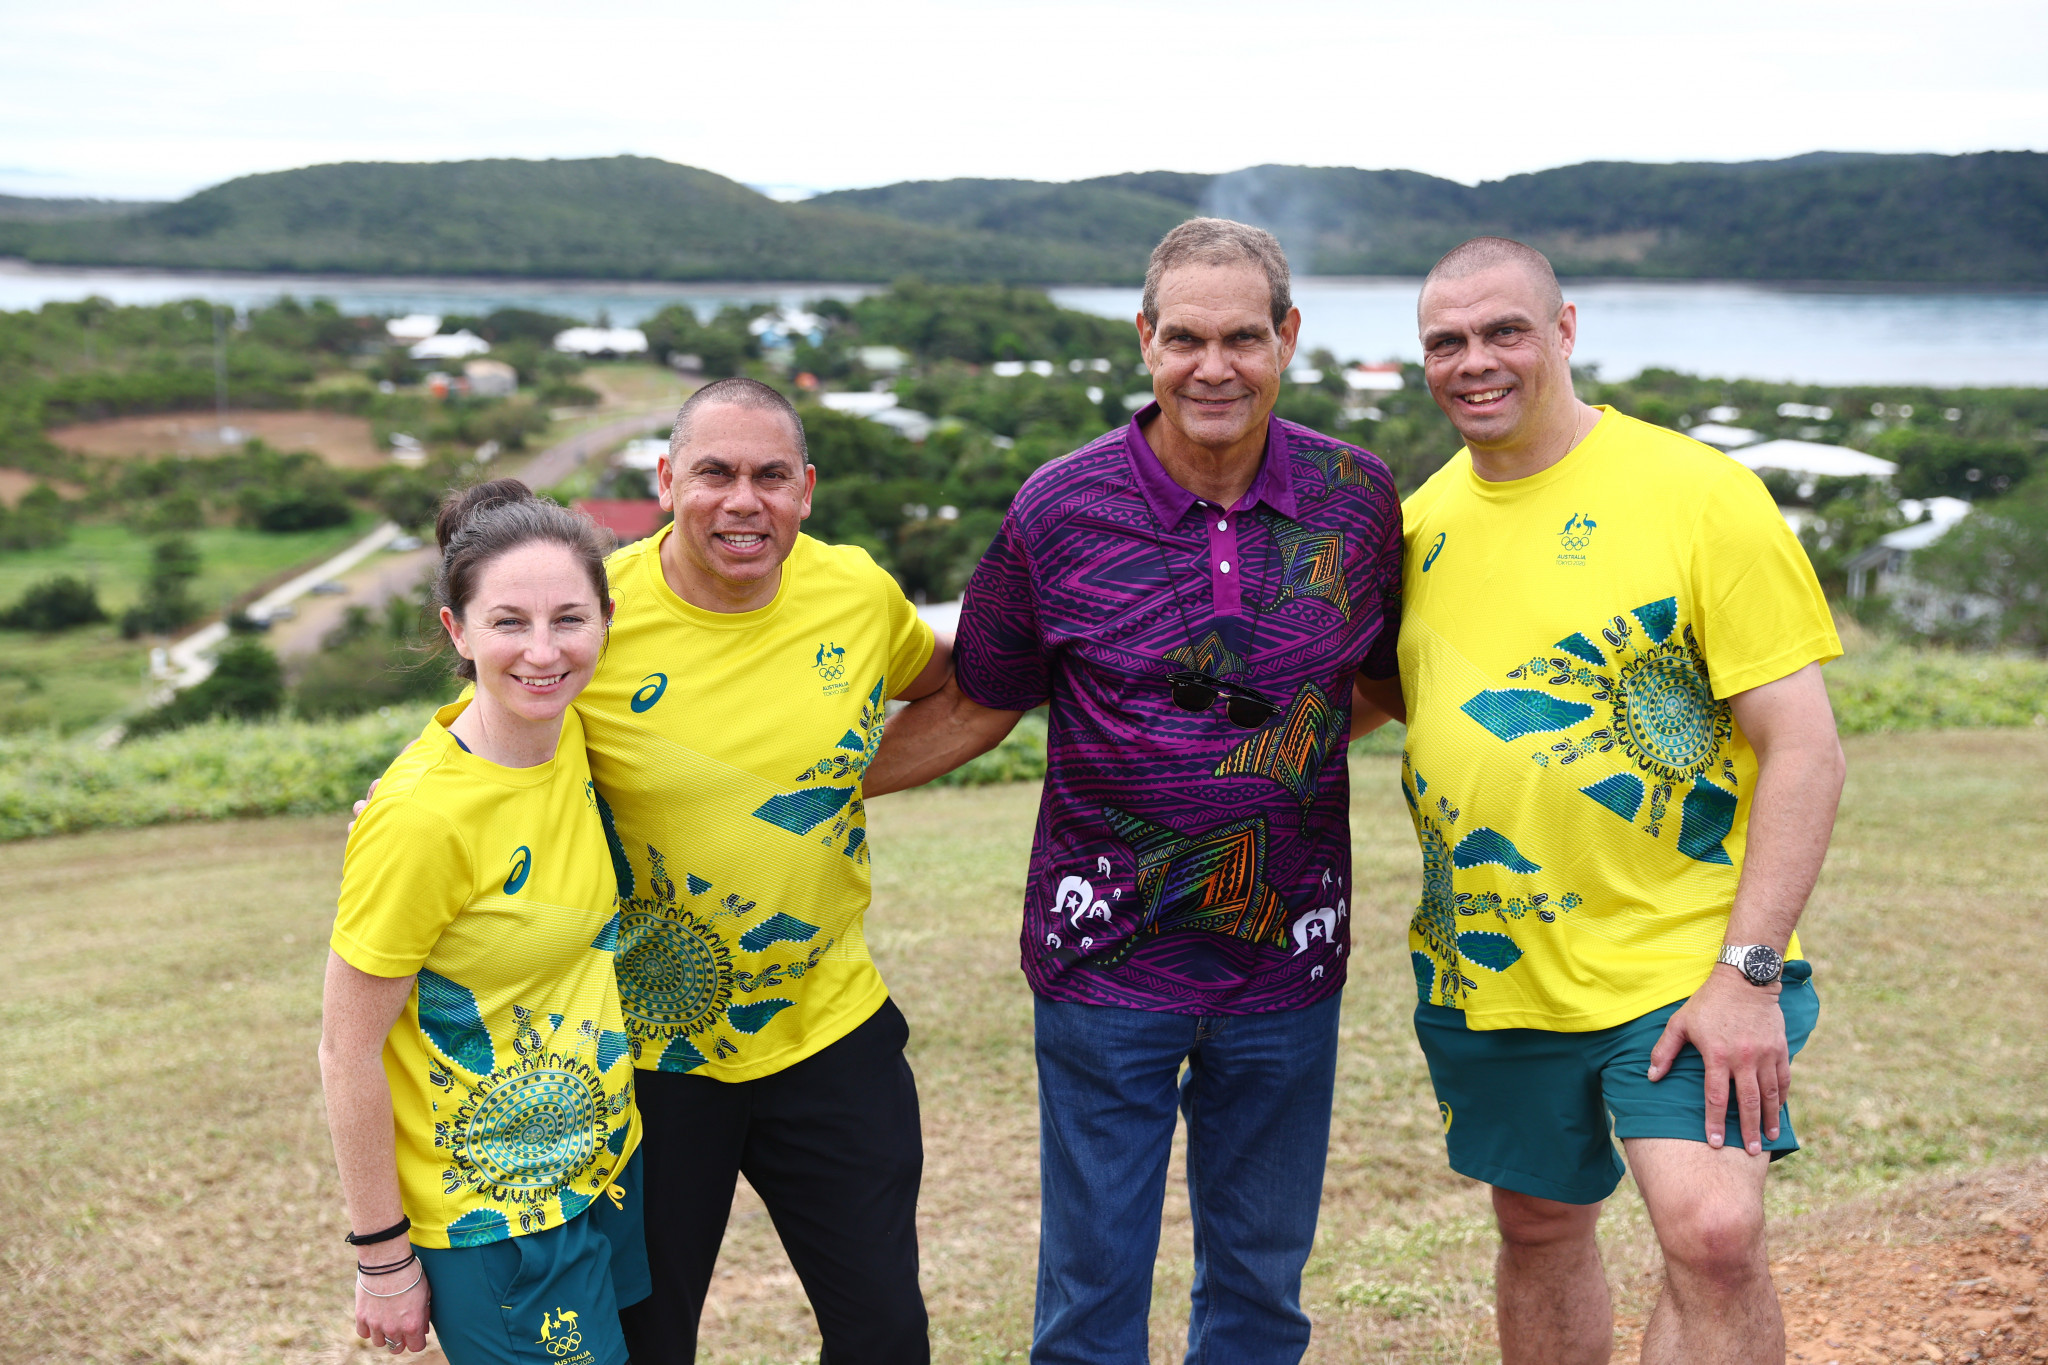 
From left, Olympians Beki Smith, Patrick Johnson, Danny Morseu and Kyle Vander-Kuyp at Green Hill Fort during the Australian Olympic Committee NAIDOC week visit ©Getty Images